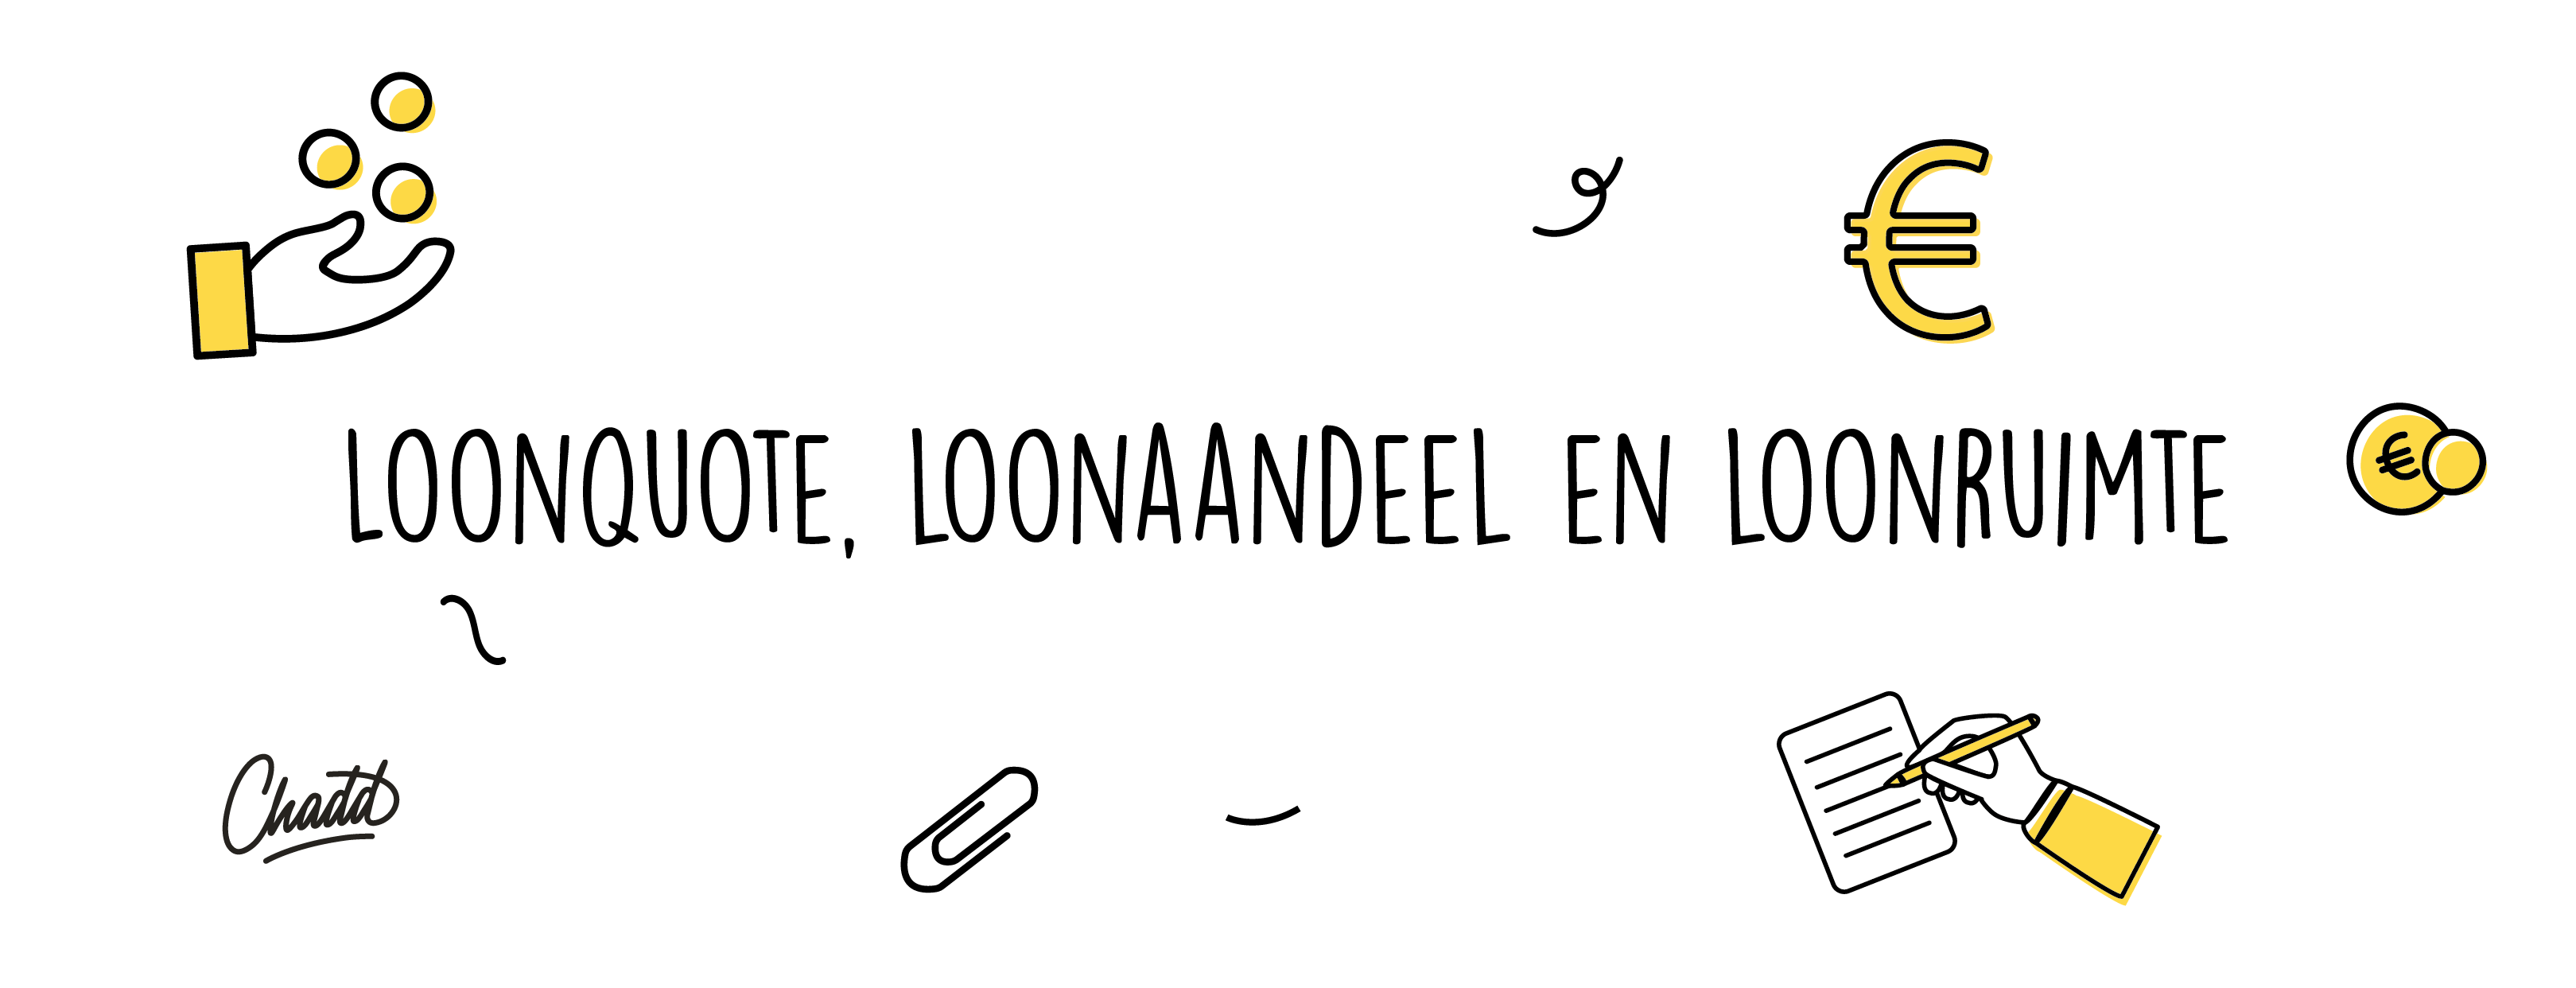 Loonquote